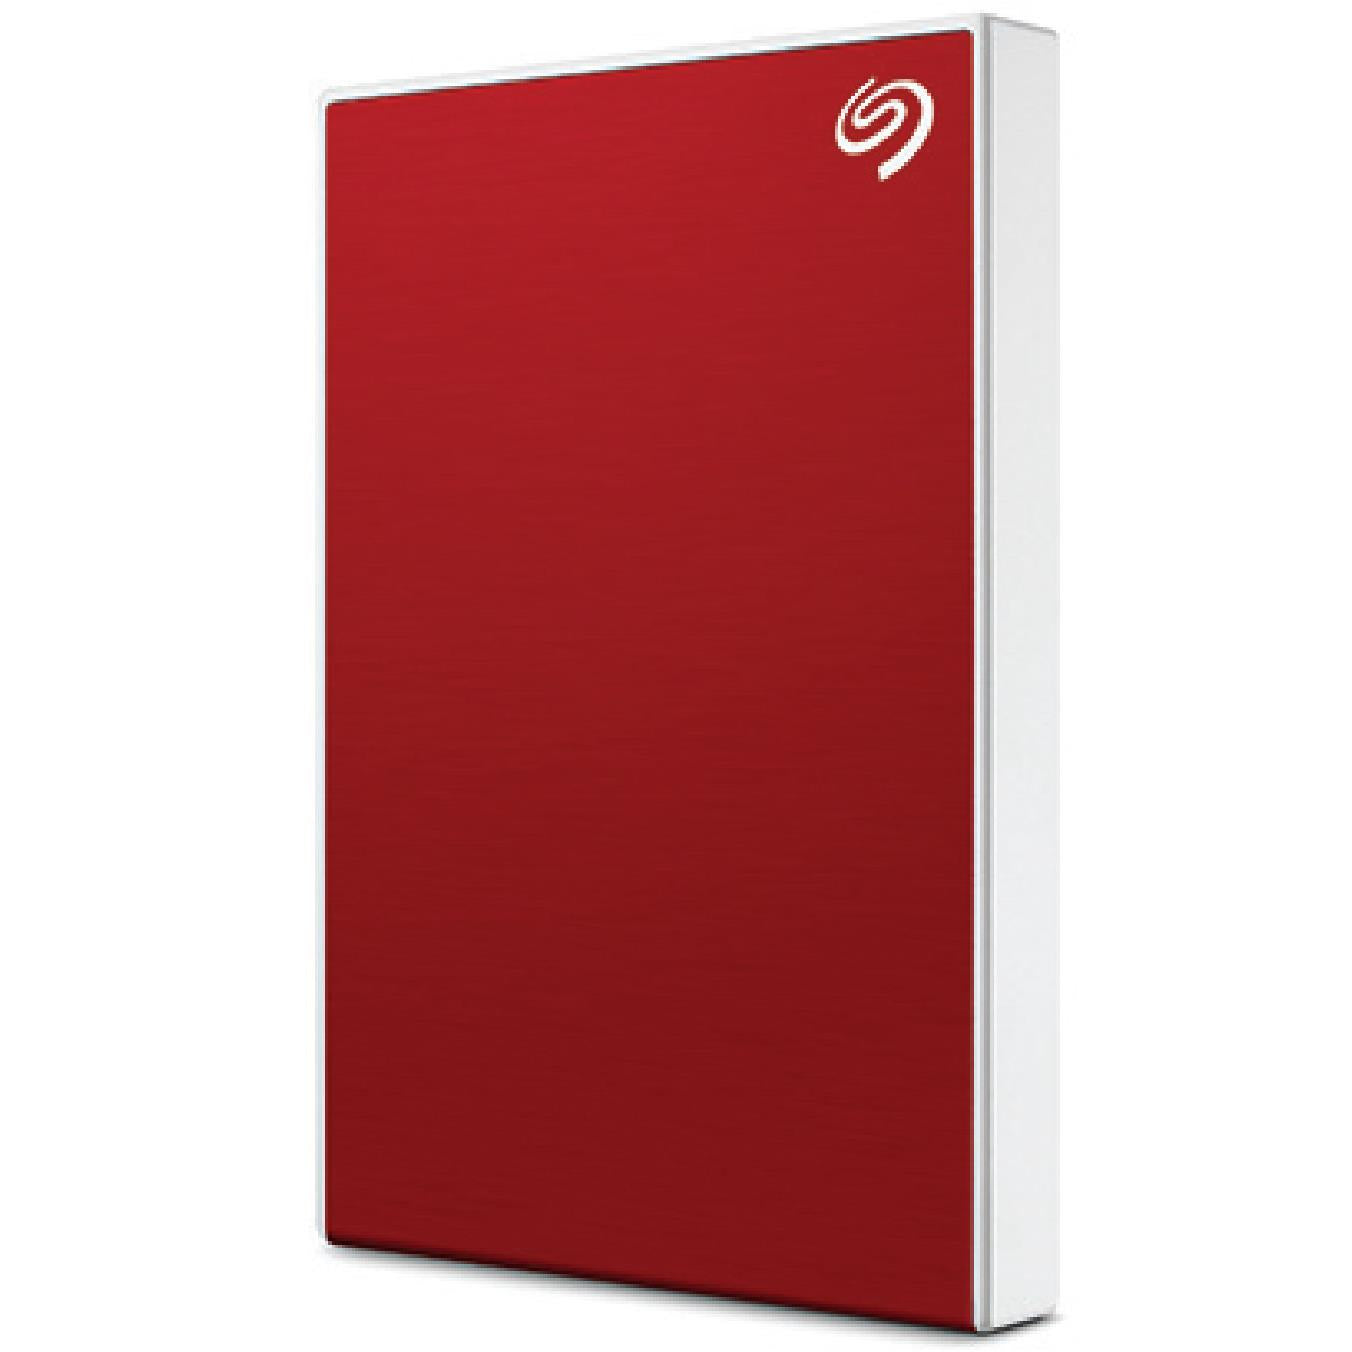 seagate one touch portable 2tb hard drive (red)